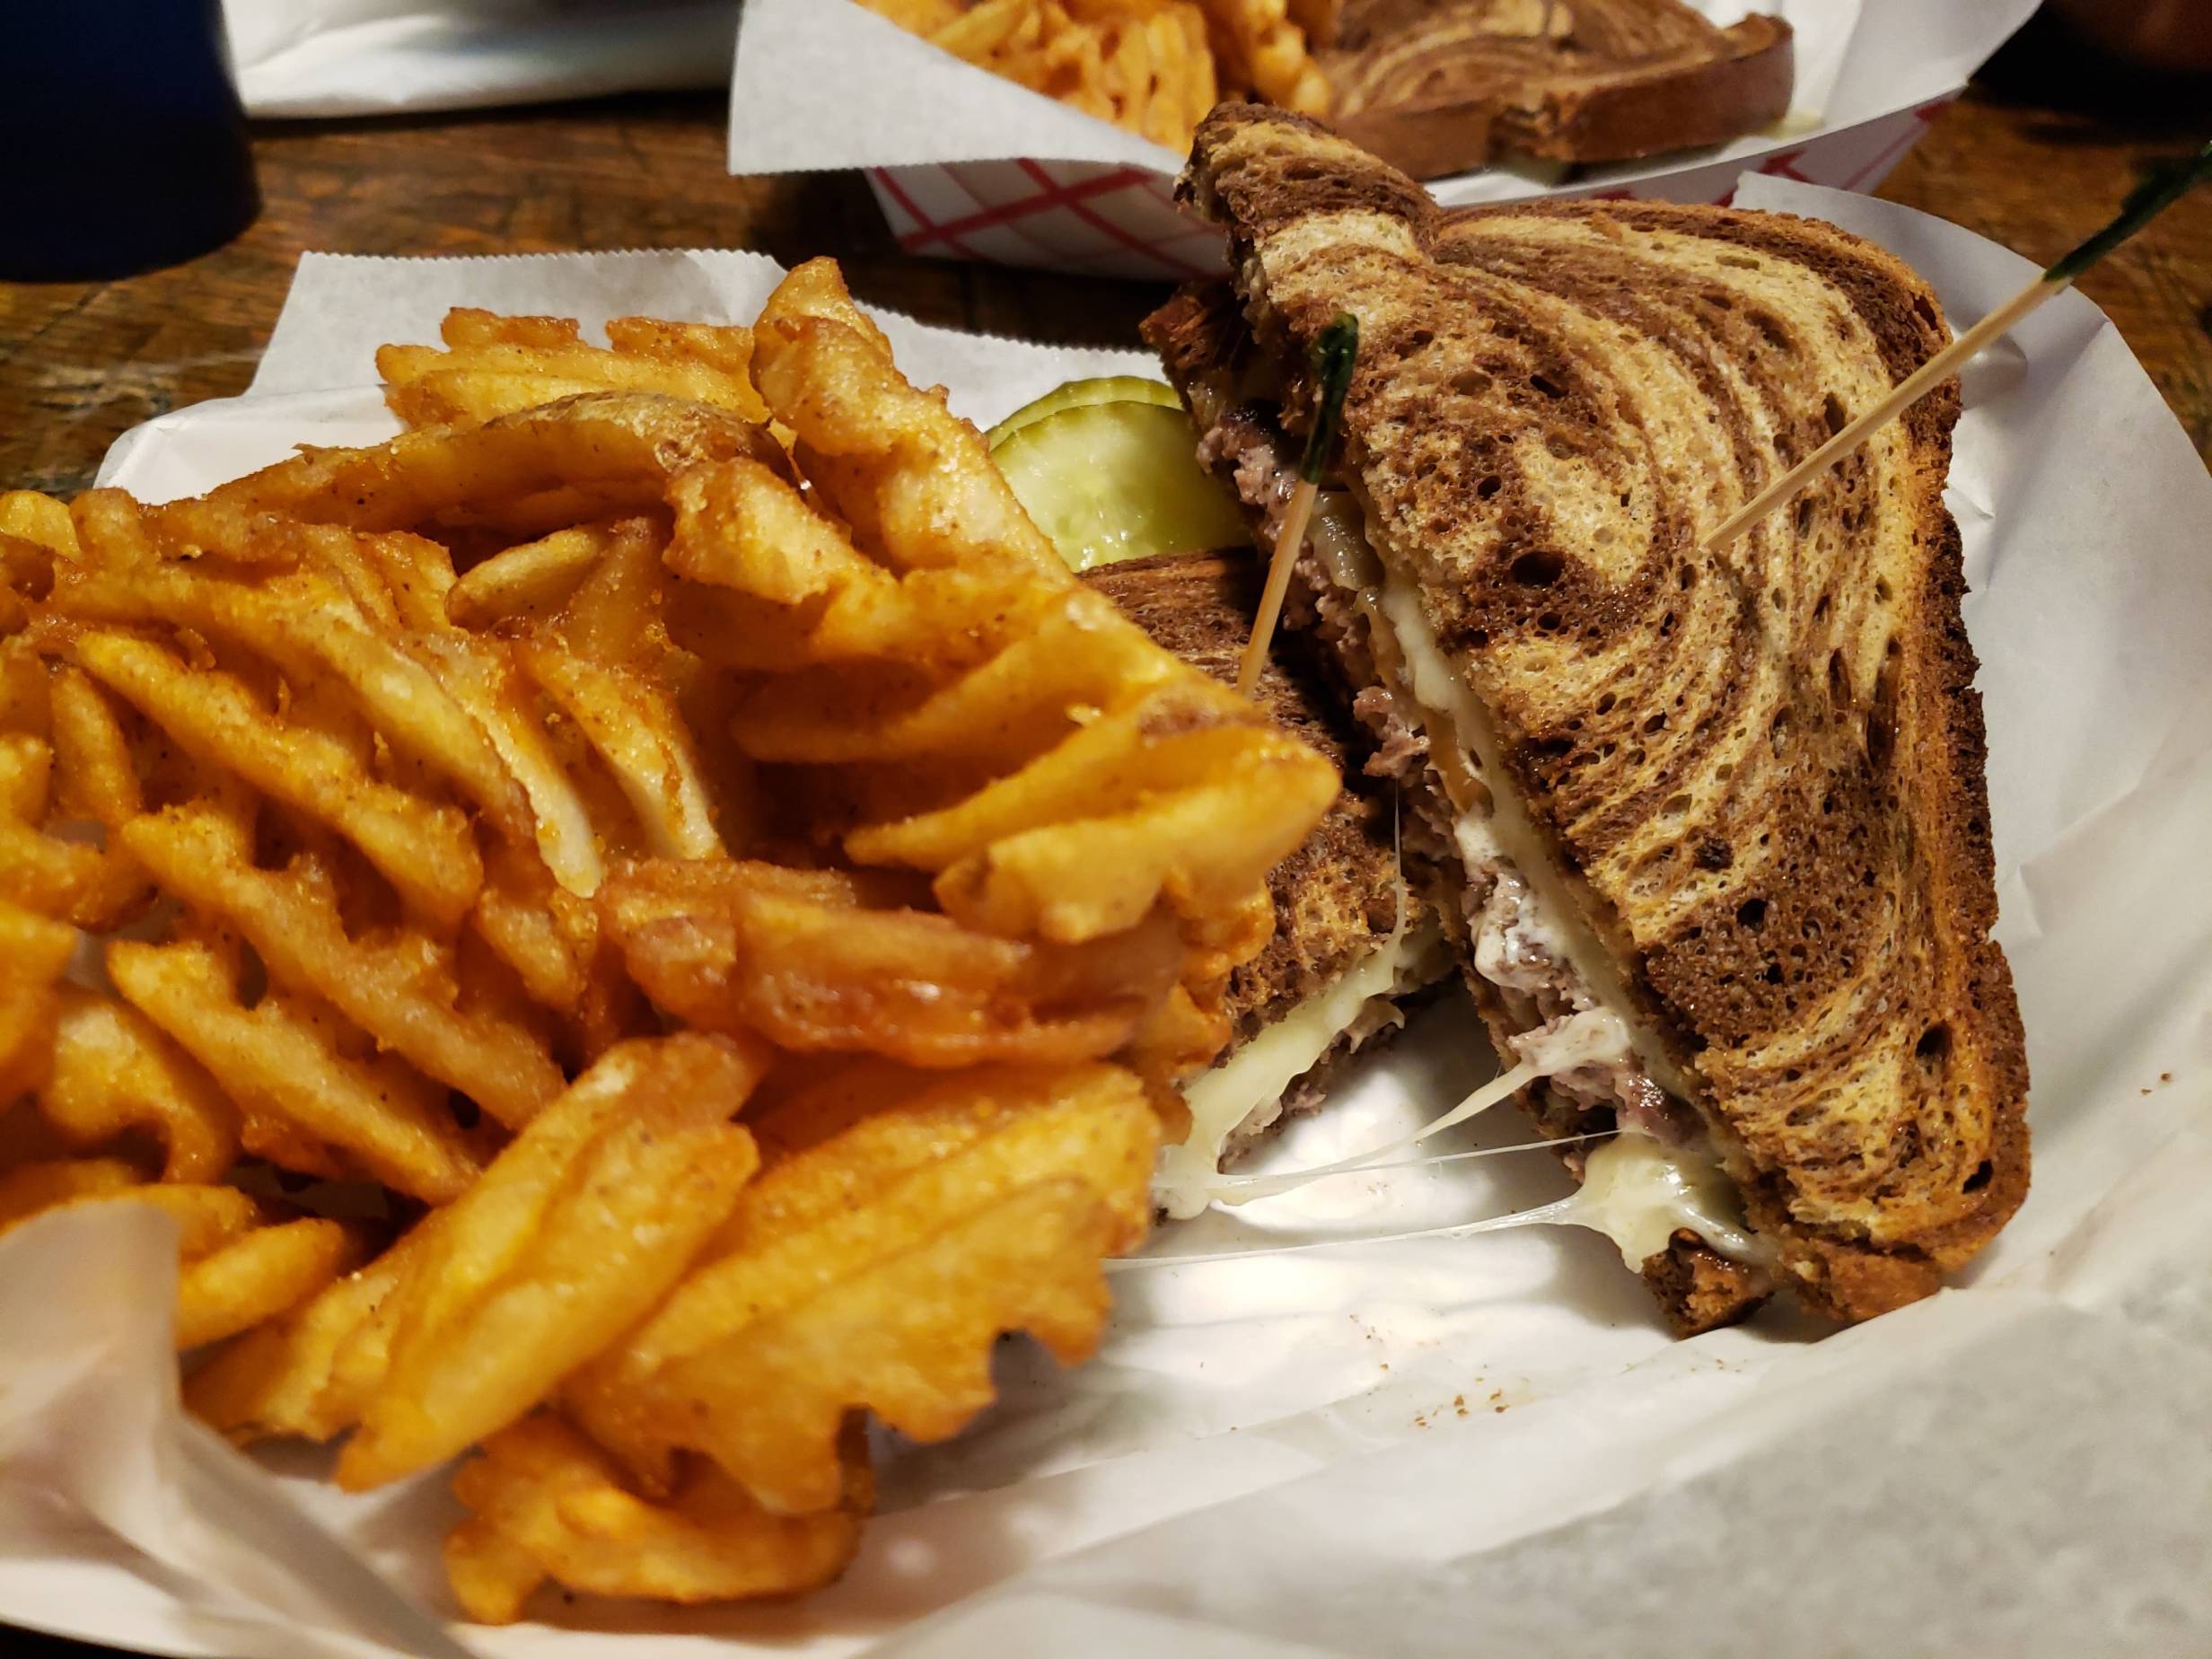  Paddyâ€™s Melt at Murphyâ€™s. Served with a side of waffle fries and slices of pickle. Inside the burger, you can see swiss cheese and onion on a marbled rye bread with two toothpicks on stuck inside each half. The plate is on a wooden table. Photo by Kanea Hughes